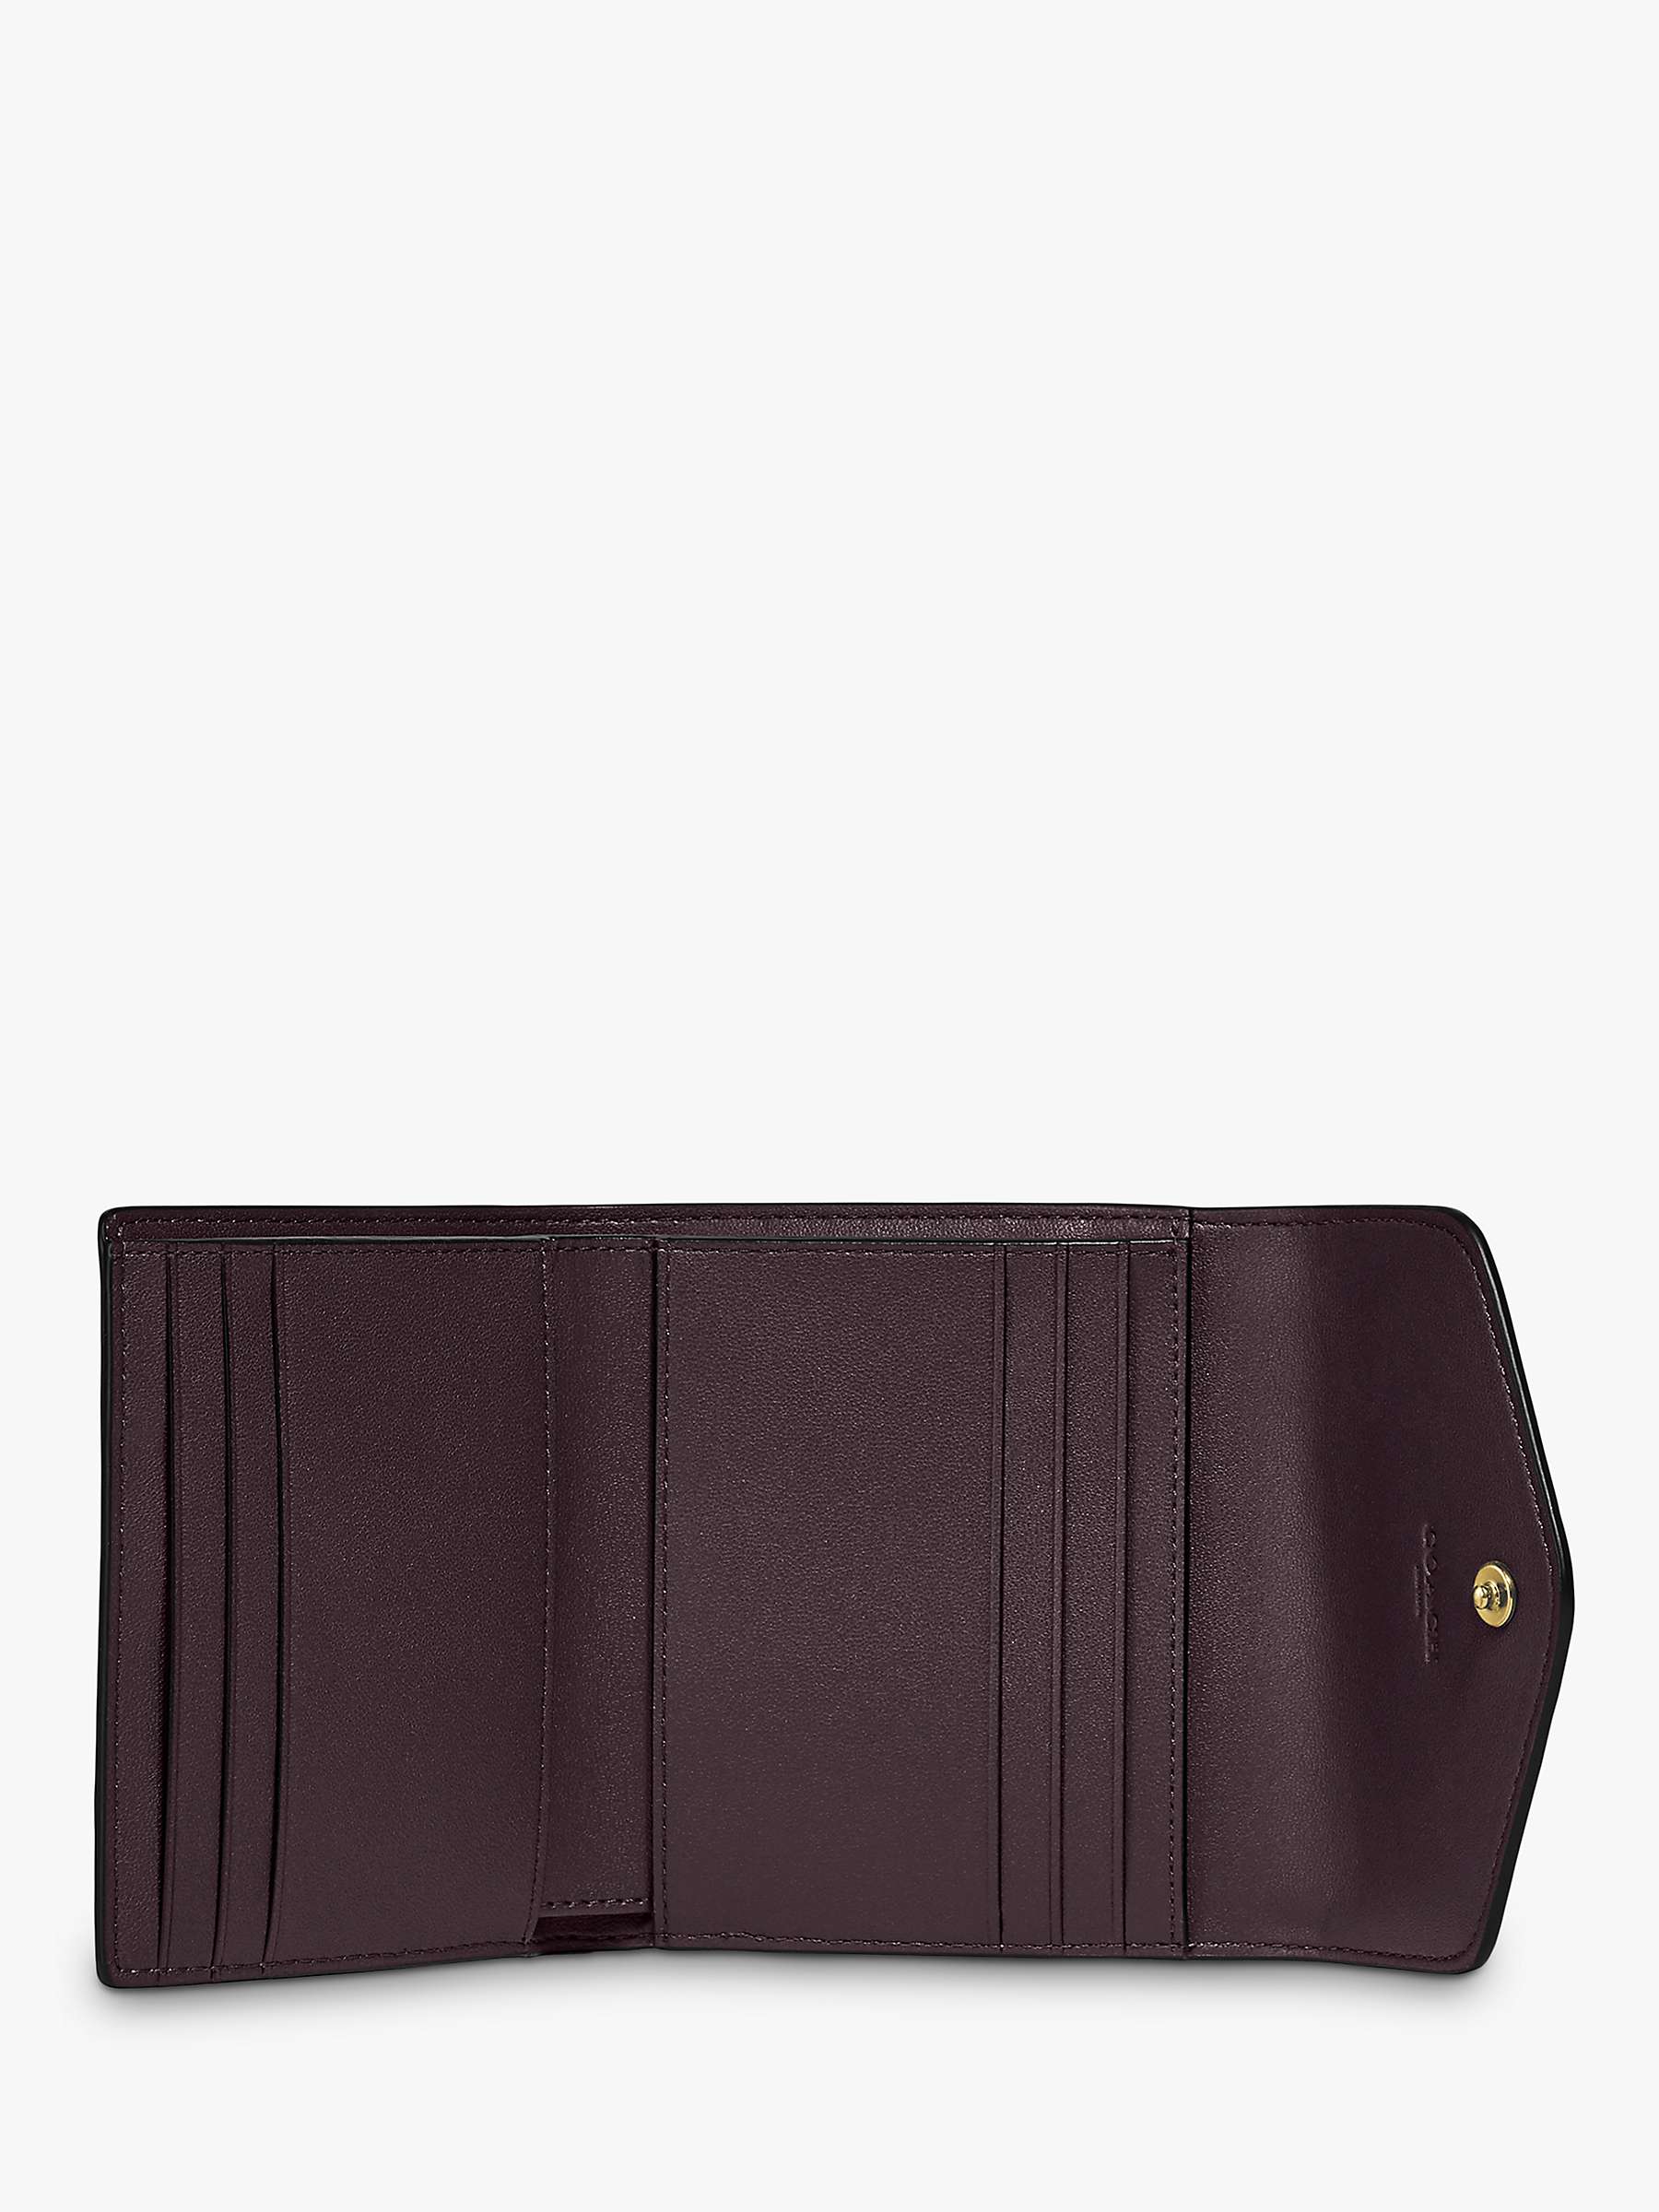 Buy Coach Wyn Small Leather Envelope Purse Online at johnlewis.com